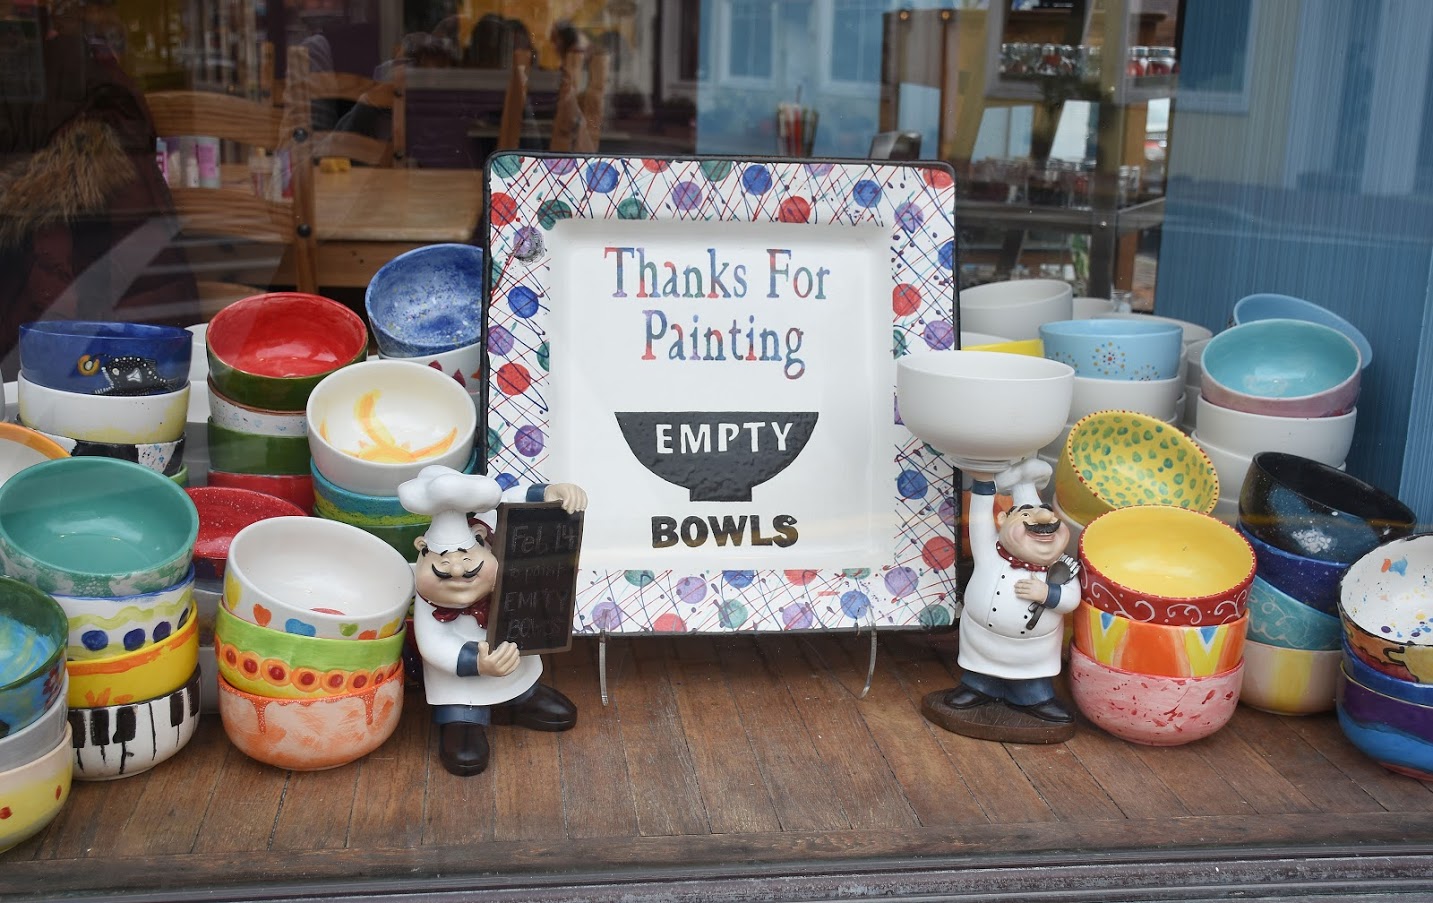 A thank you sign at Empty Bowls